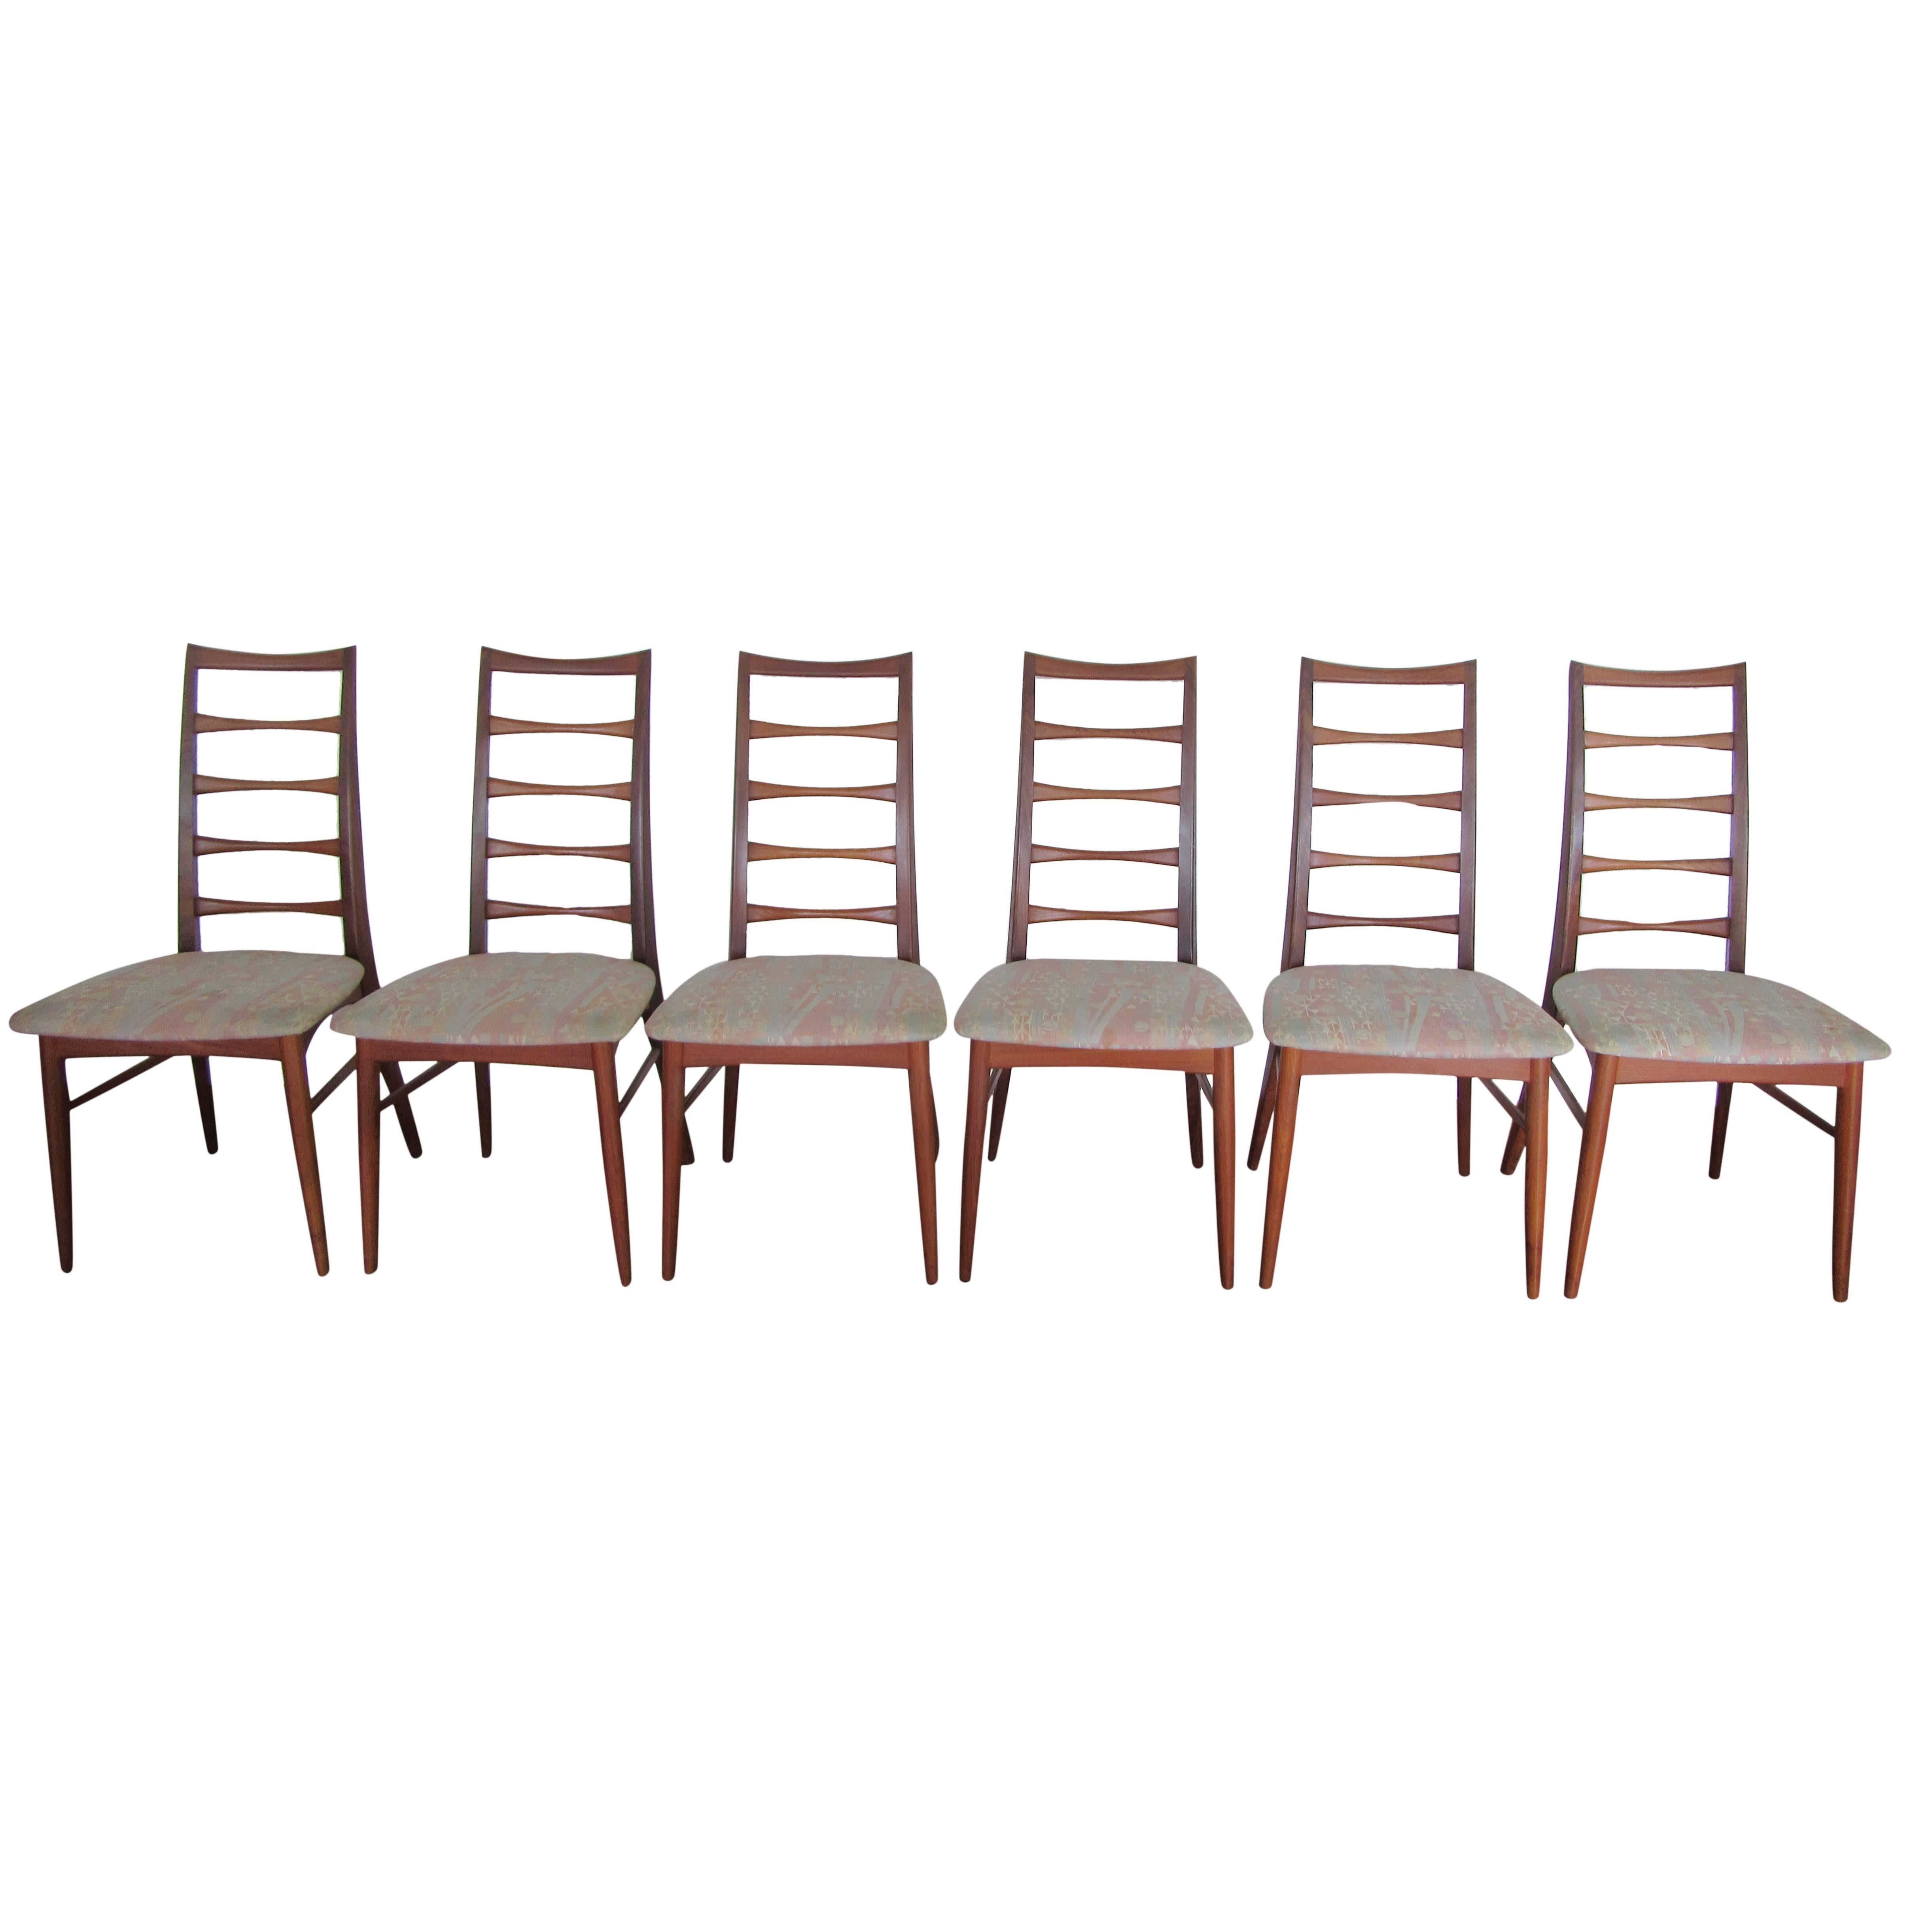 Four Teak Dining Chairs by Niels Kofoed For Sale